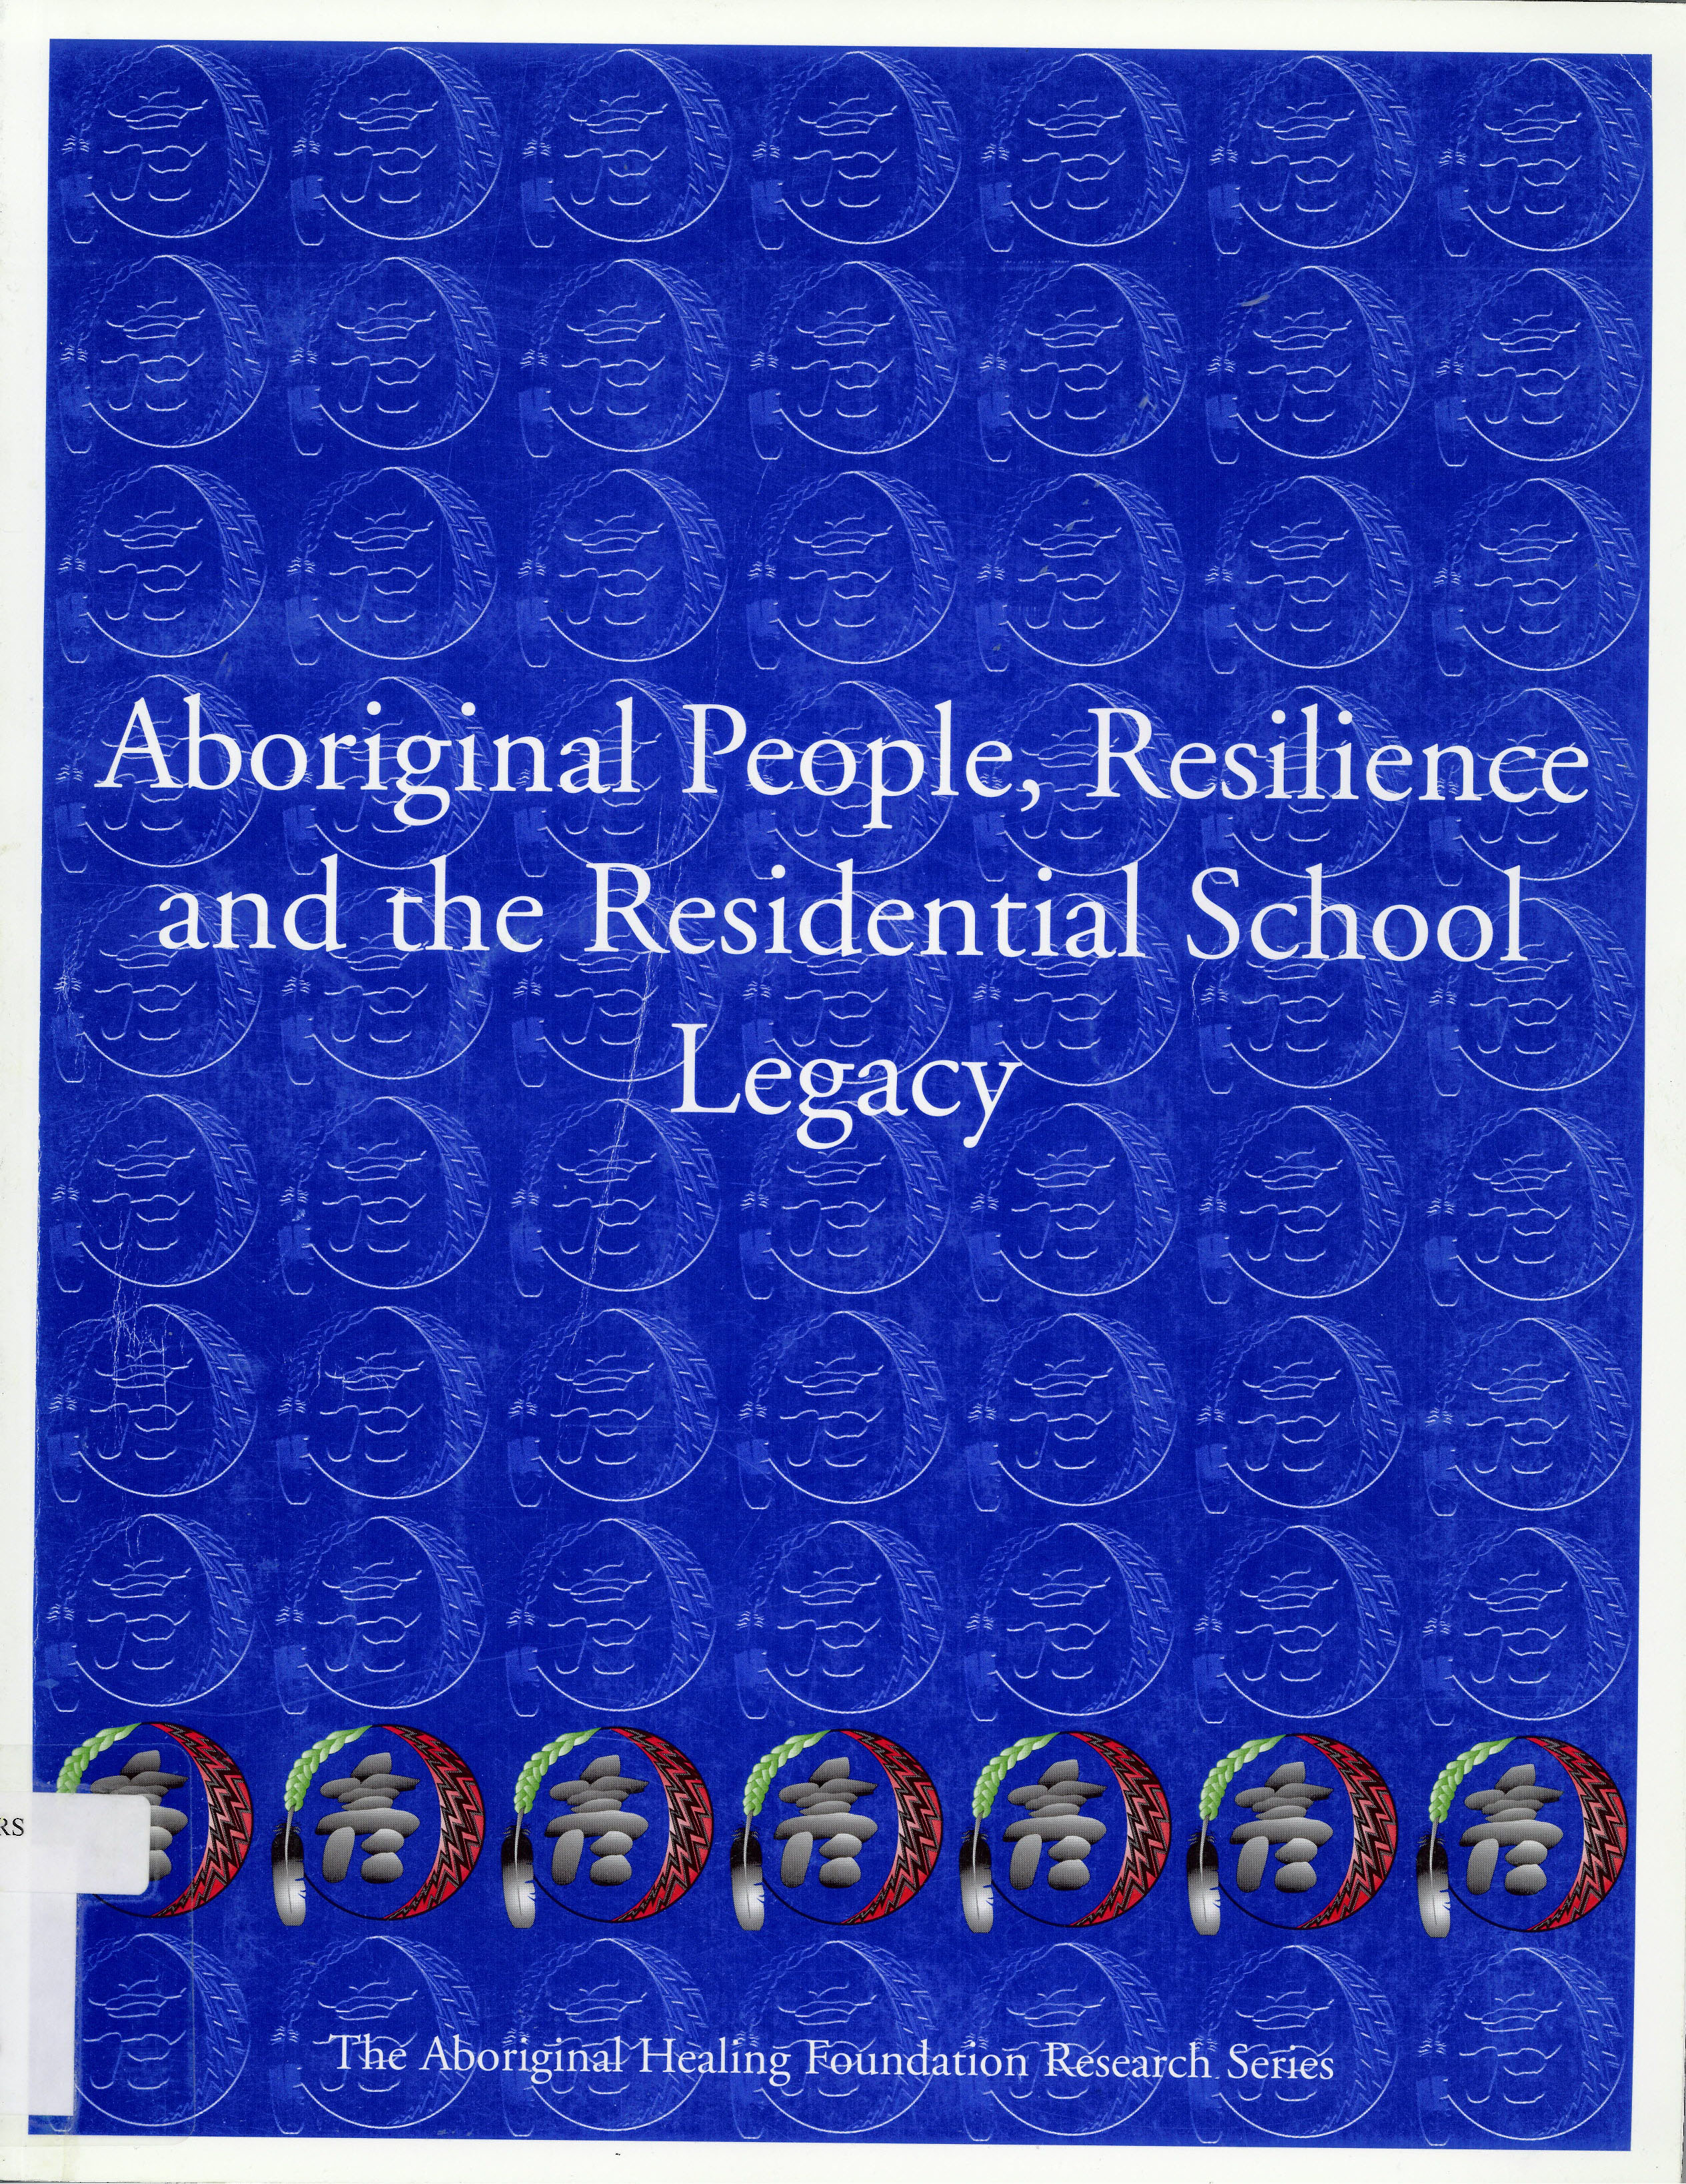 Aboriginal people, resilience and the residential school legacy : prepared for the Aboriginal Healing Foundation